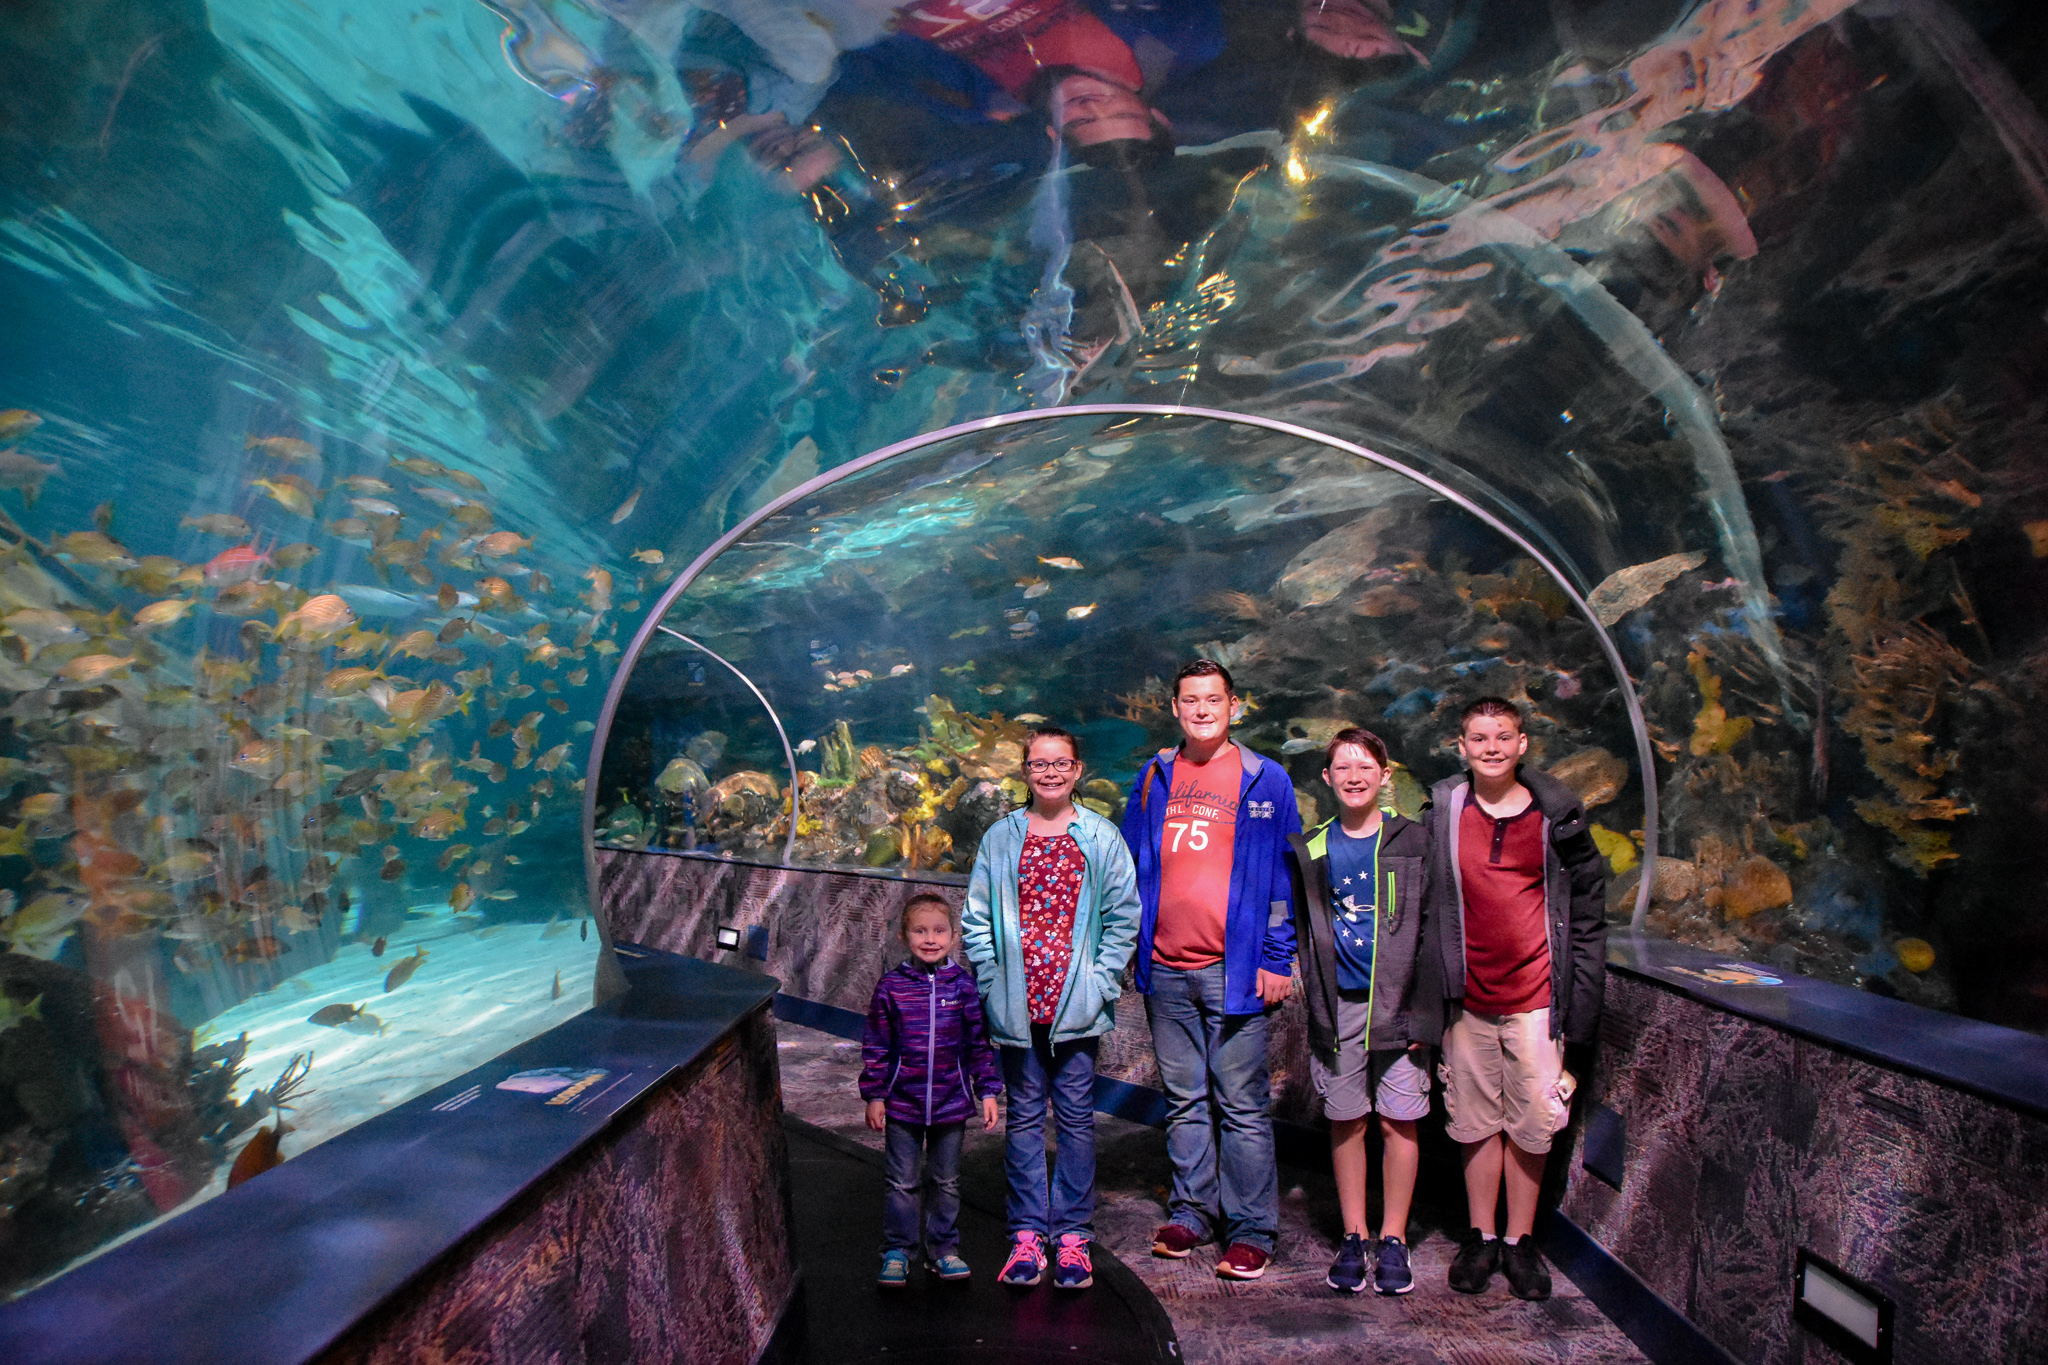 Ripley's Aquarium of the Smokies is one of our favorite things to do in Gatlinburg with kids.